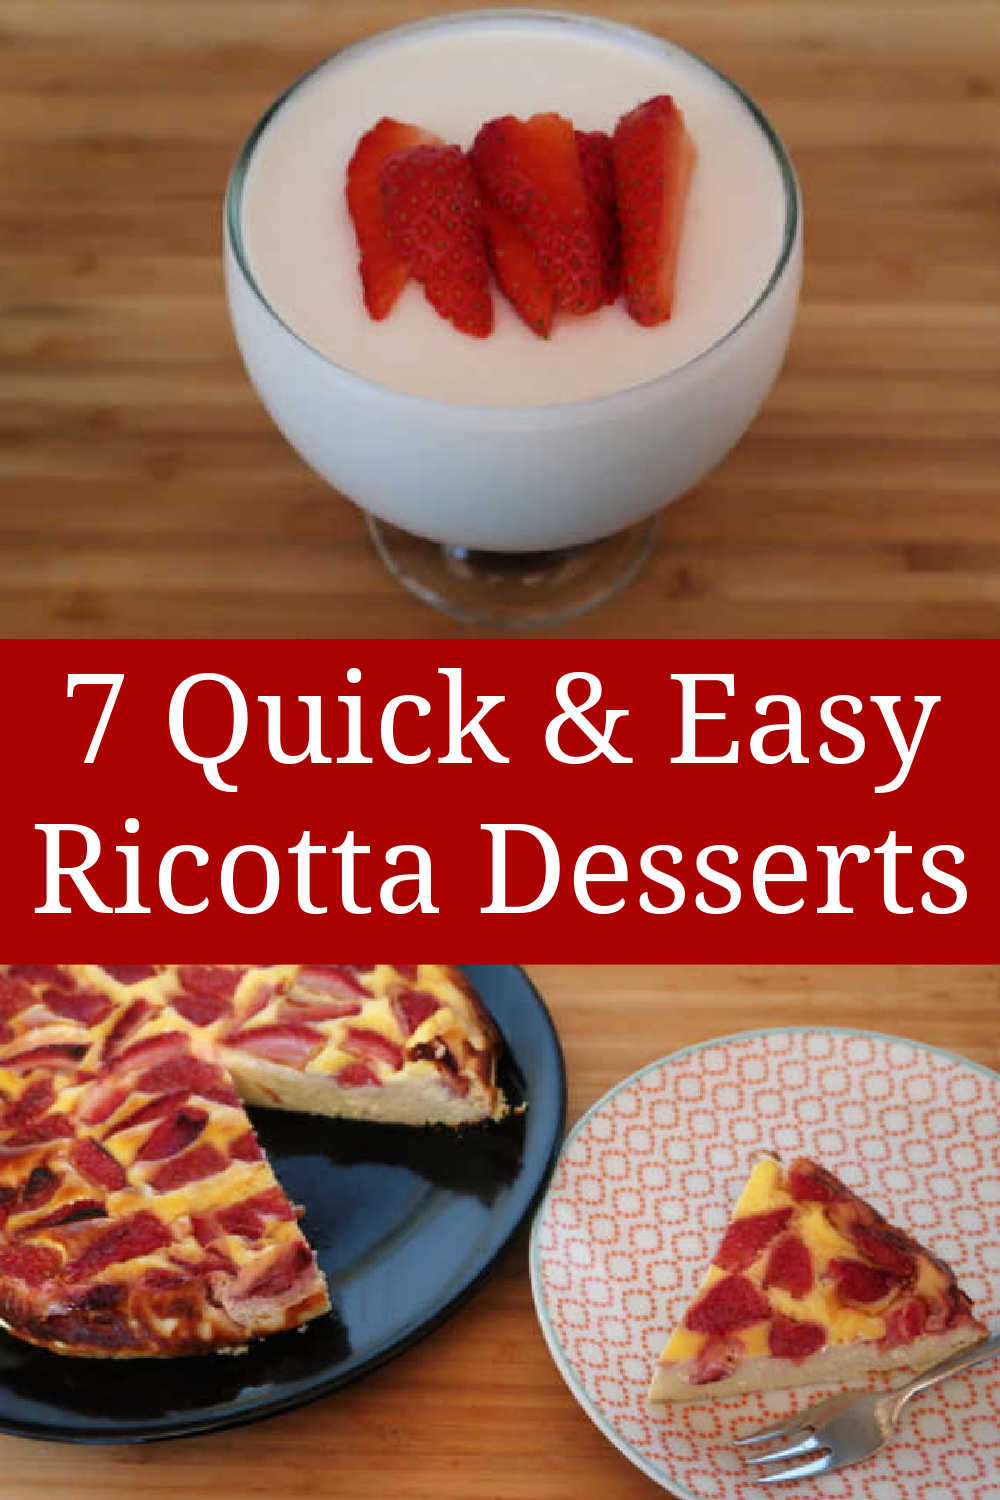 7 Ricotta Dessert Recipes - ideas for easy creamy dessert treats with simple ingredients - including healthy keto friendly lemon, chocolate, no bake desserts and baked ricotta desserts.